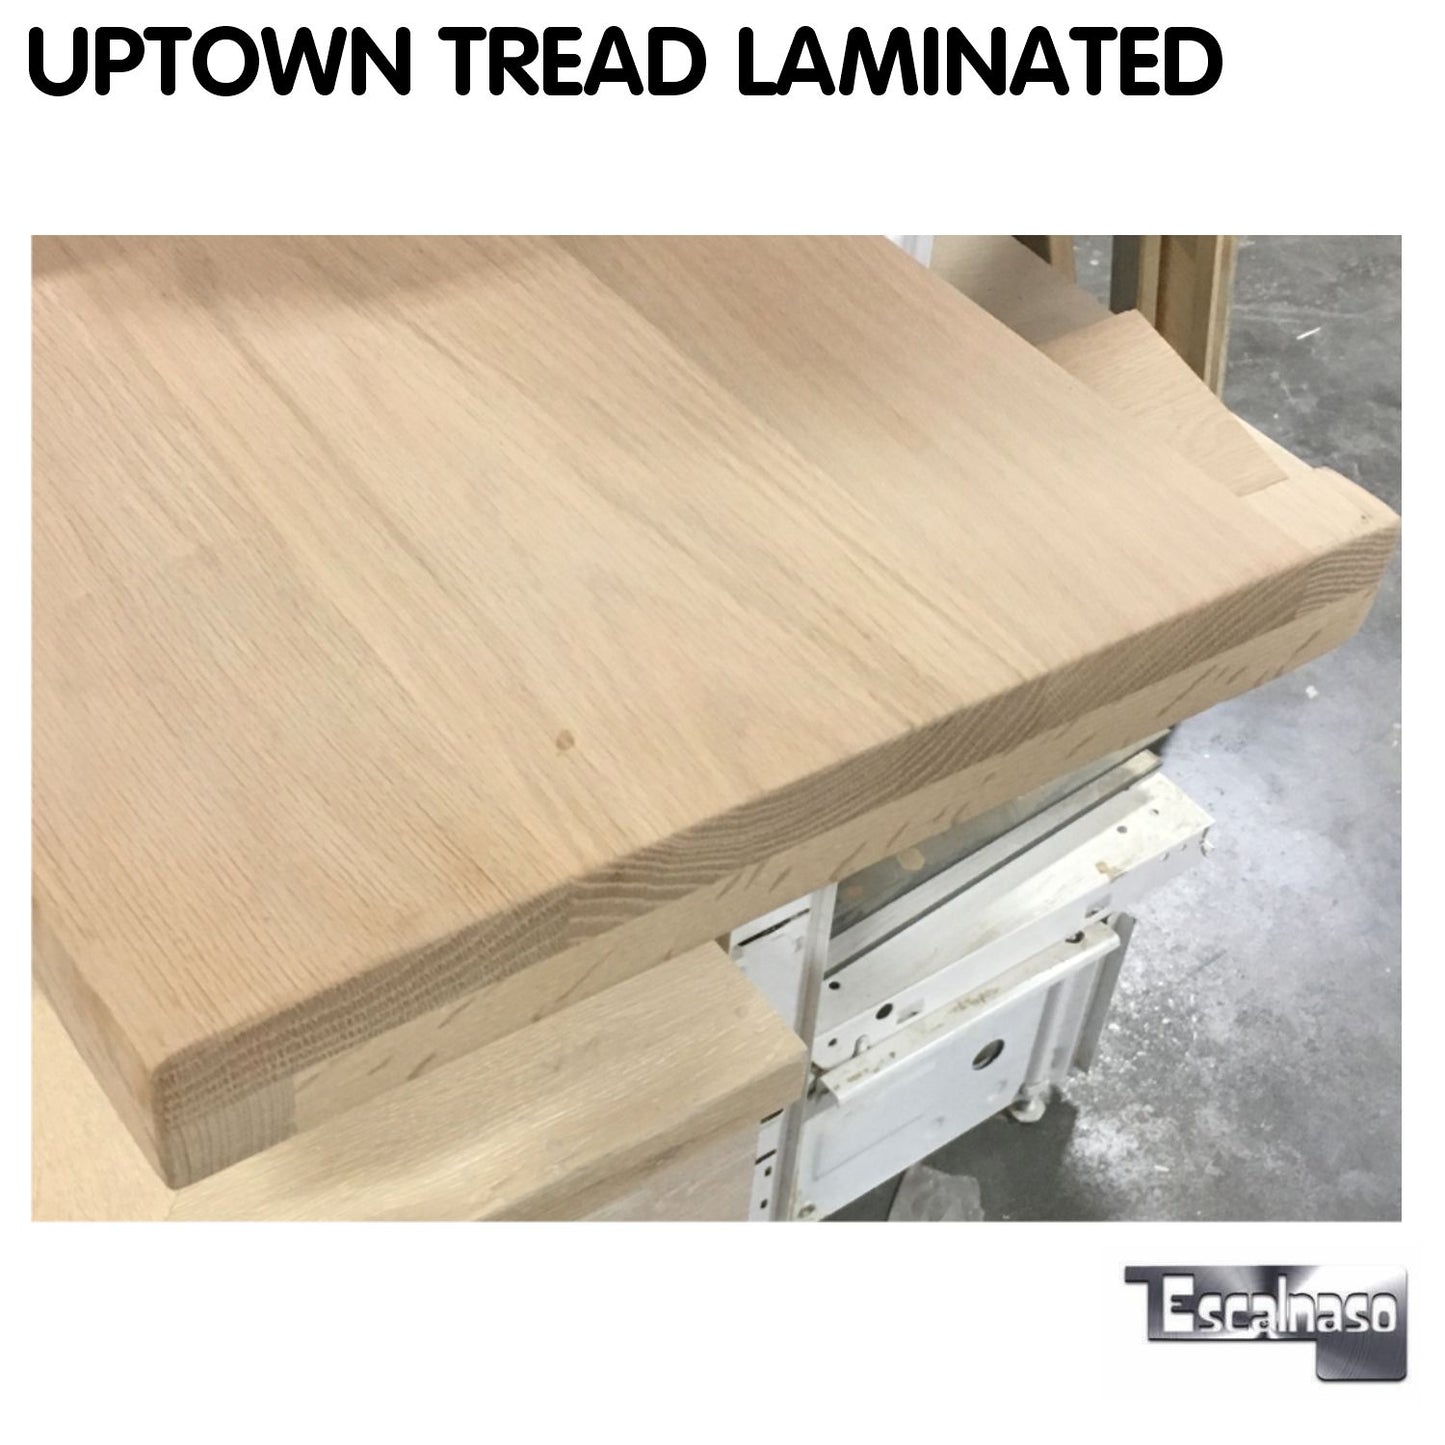 (13638) UPTOWN TREAD ADD CAP TO RIGHT SIDE